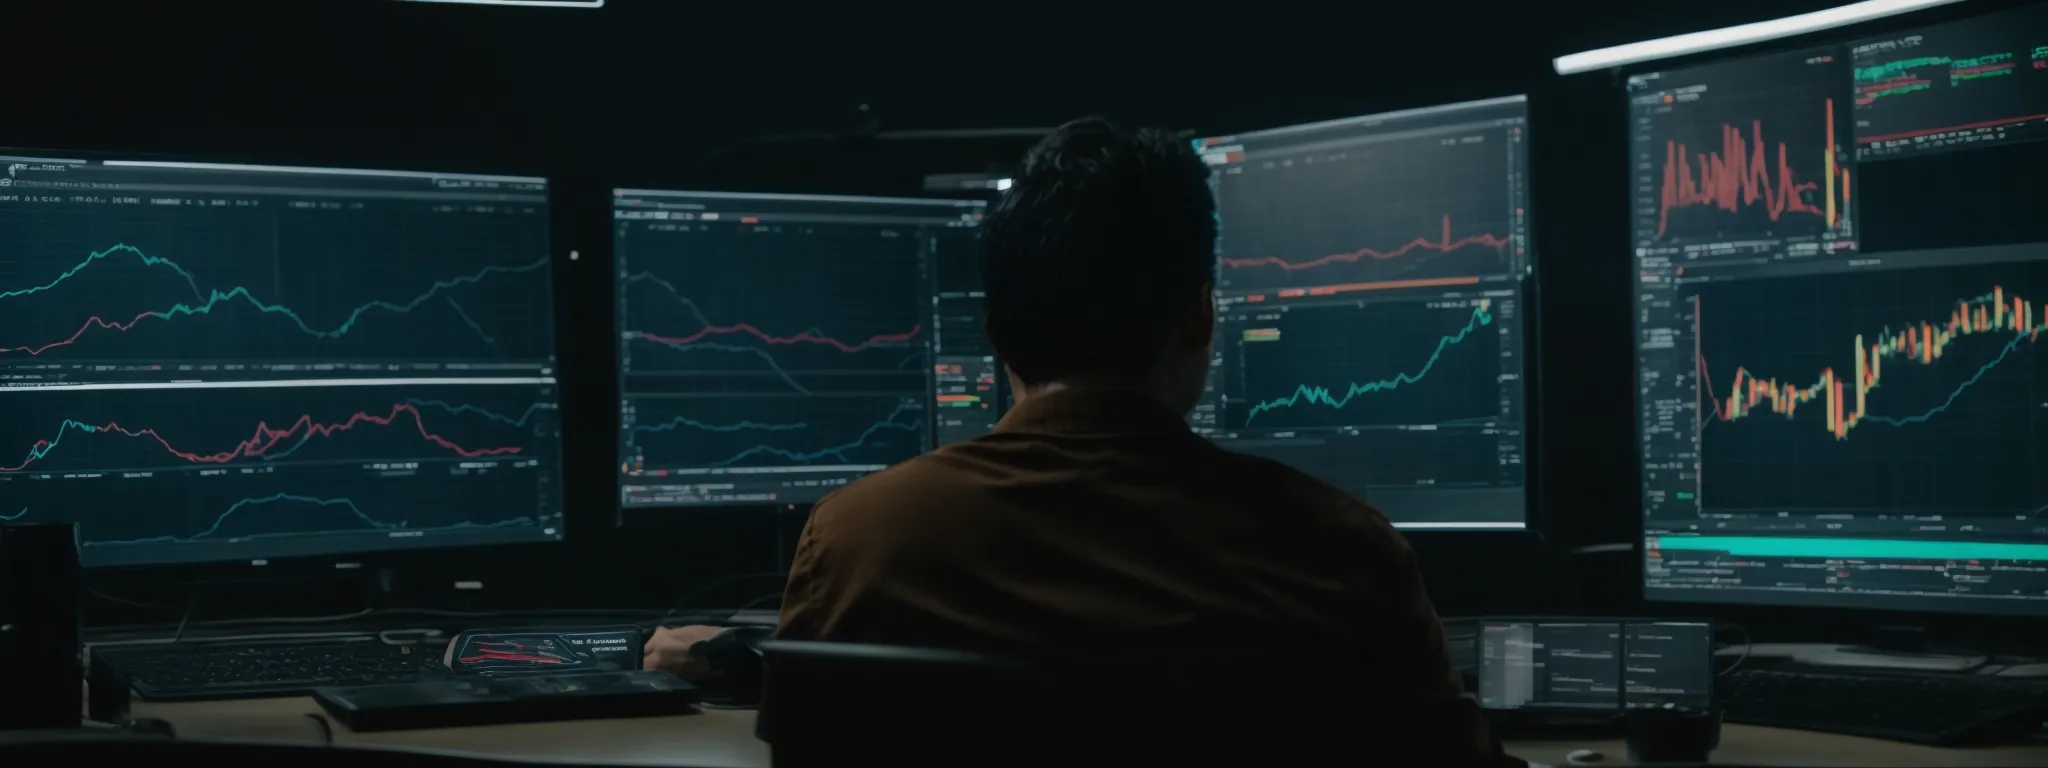 a person sits in front of a computer screen displaying graphs and analytics, hinting at the integration of ai in seo strategies.